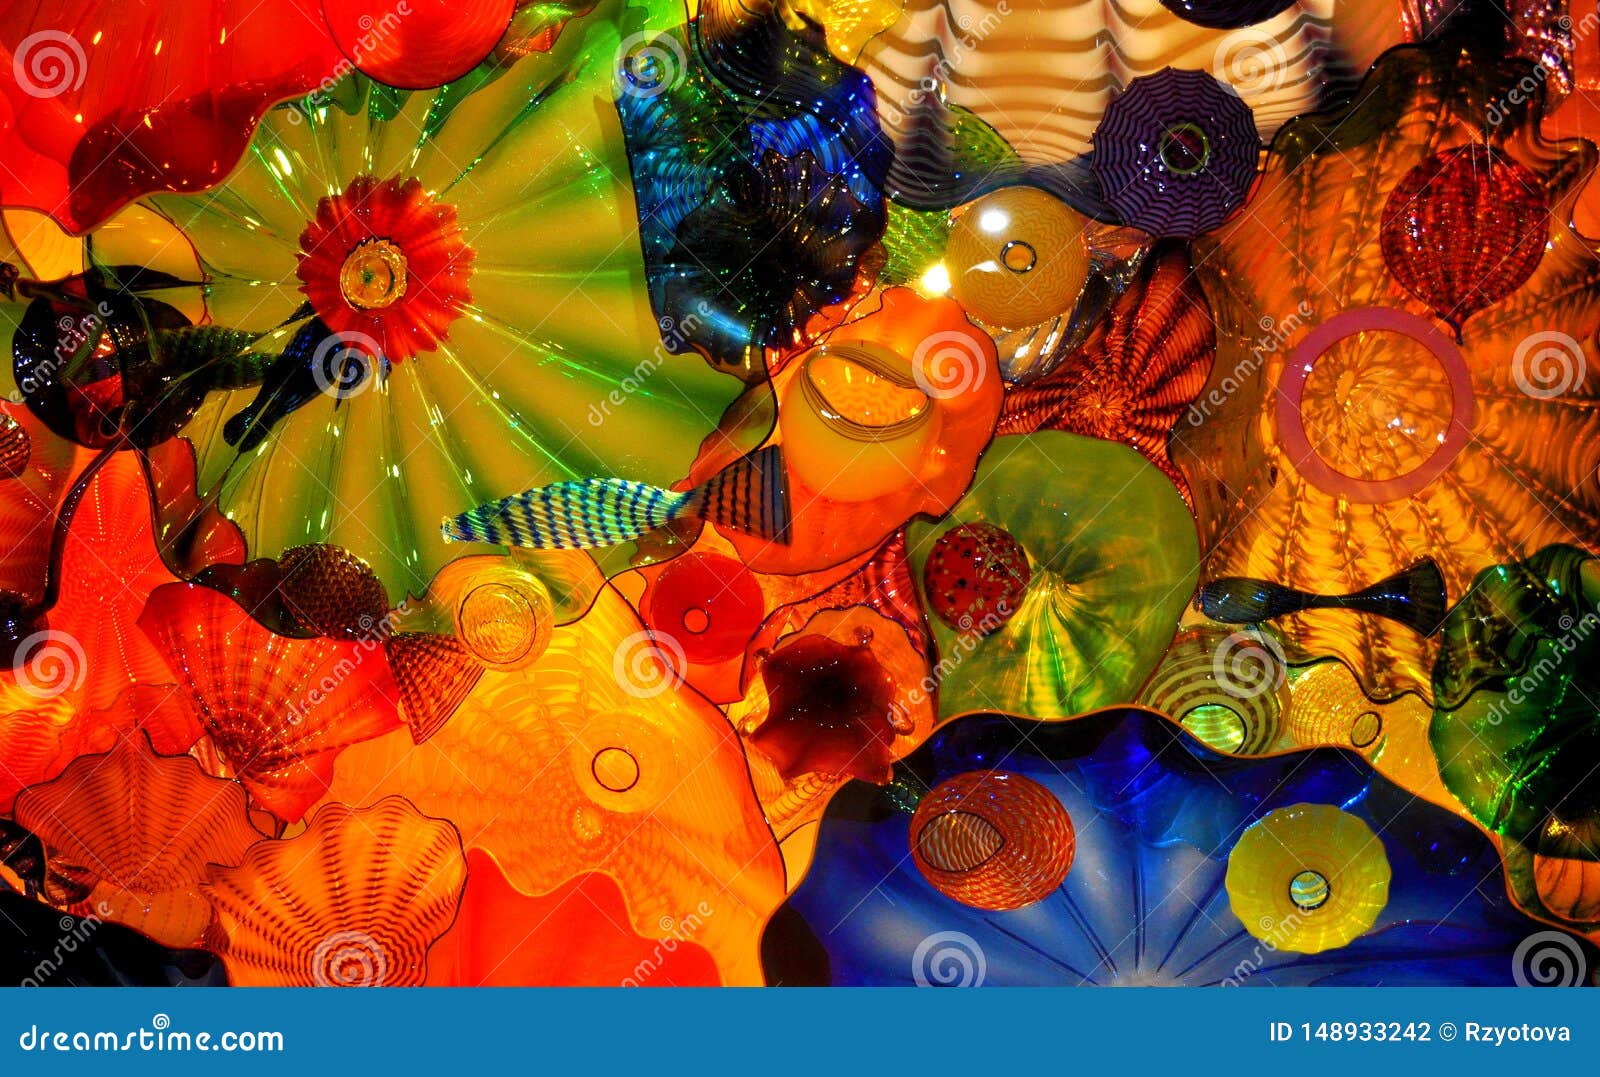 Persian Ceiling Chihuly Garden And Glass Stock Photo